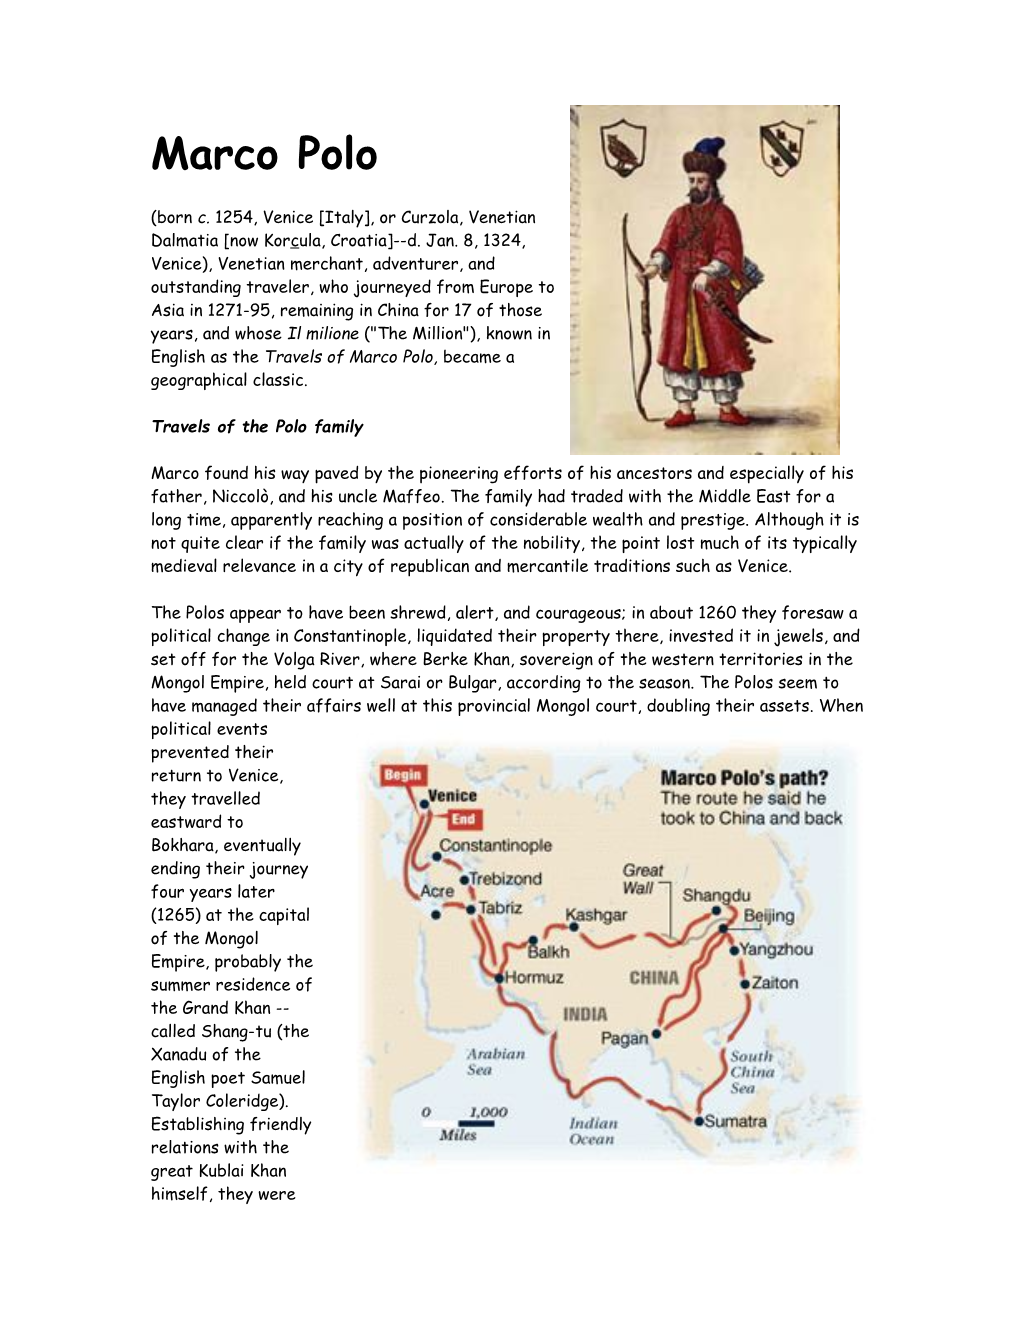 Travels of the Polo Family